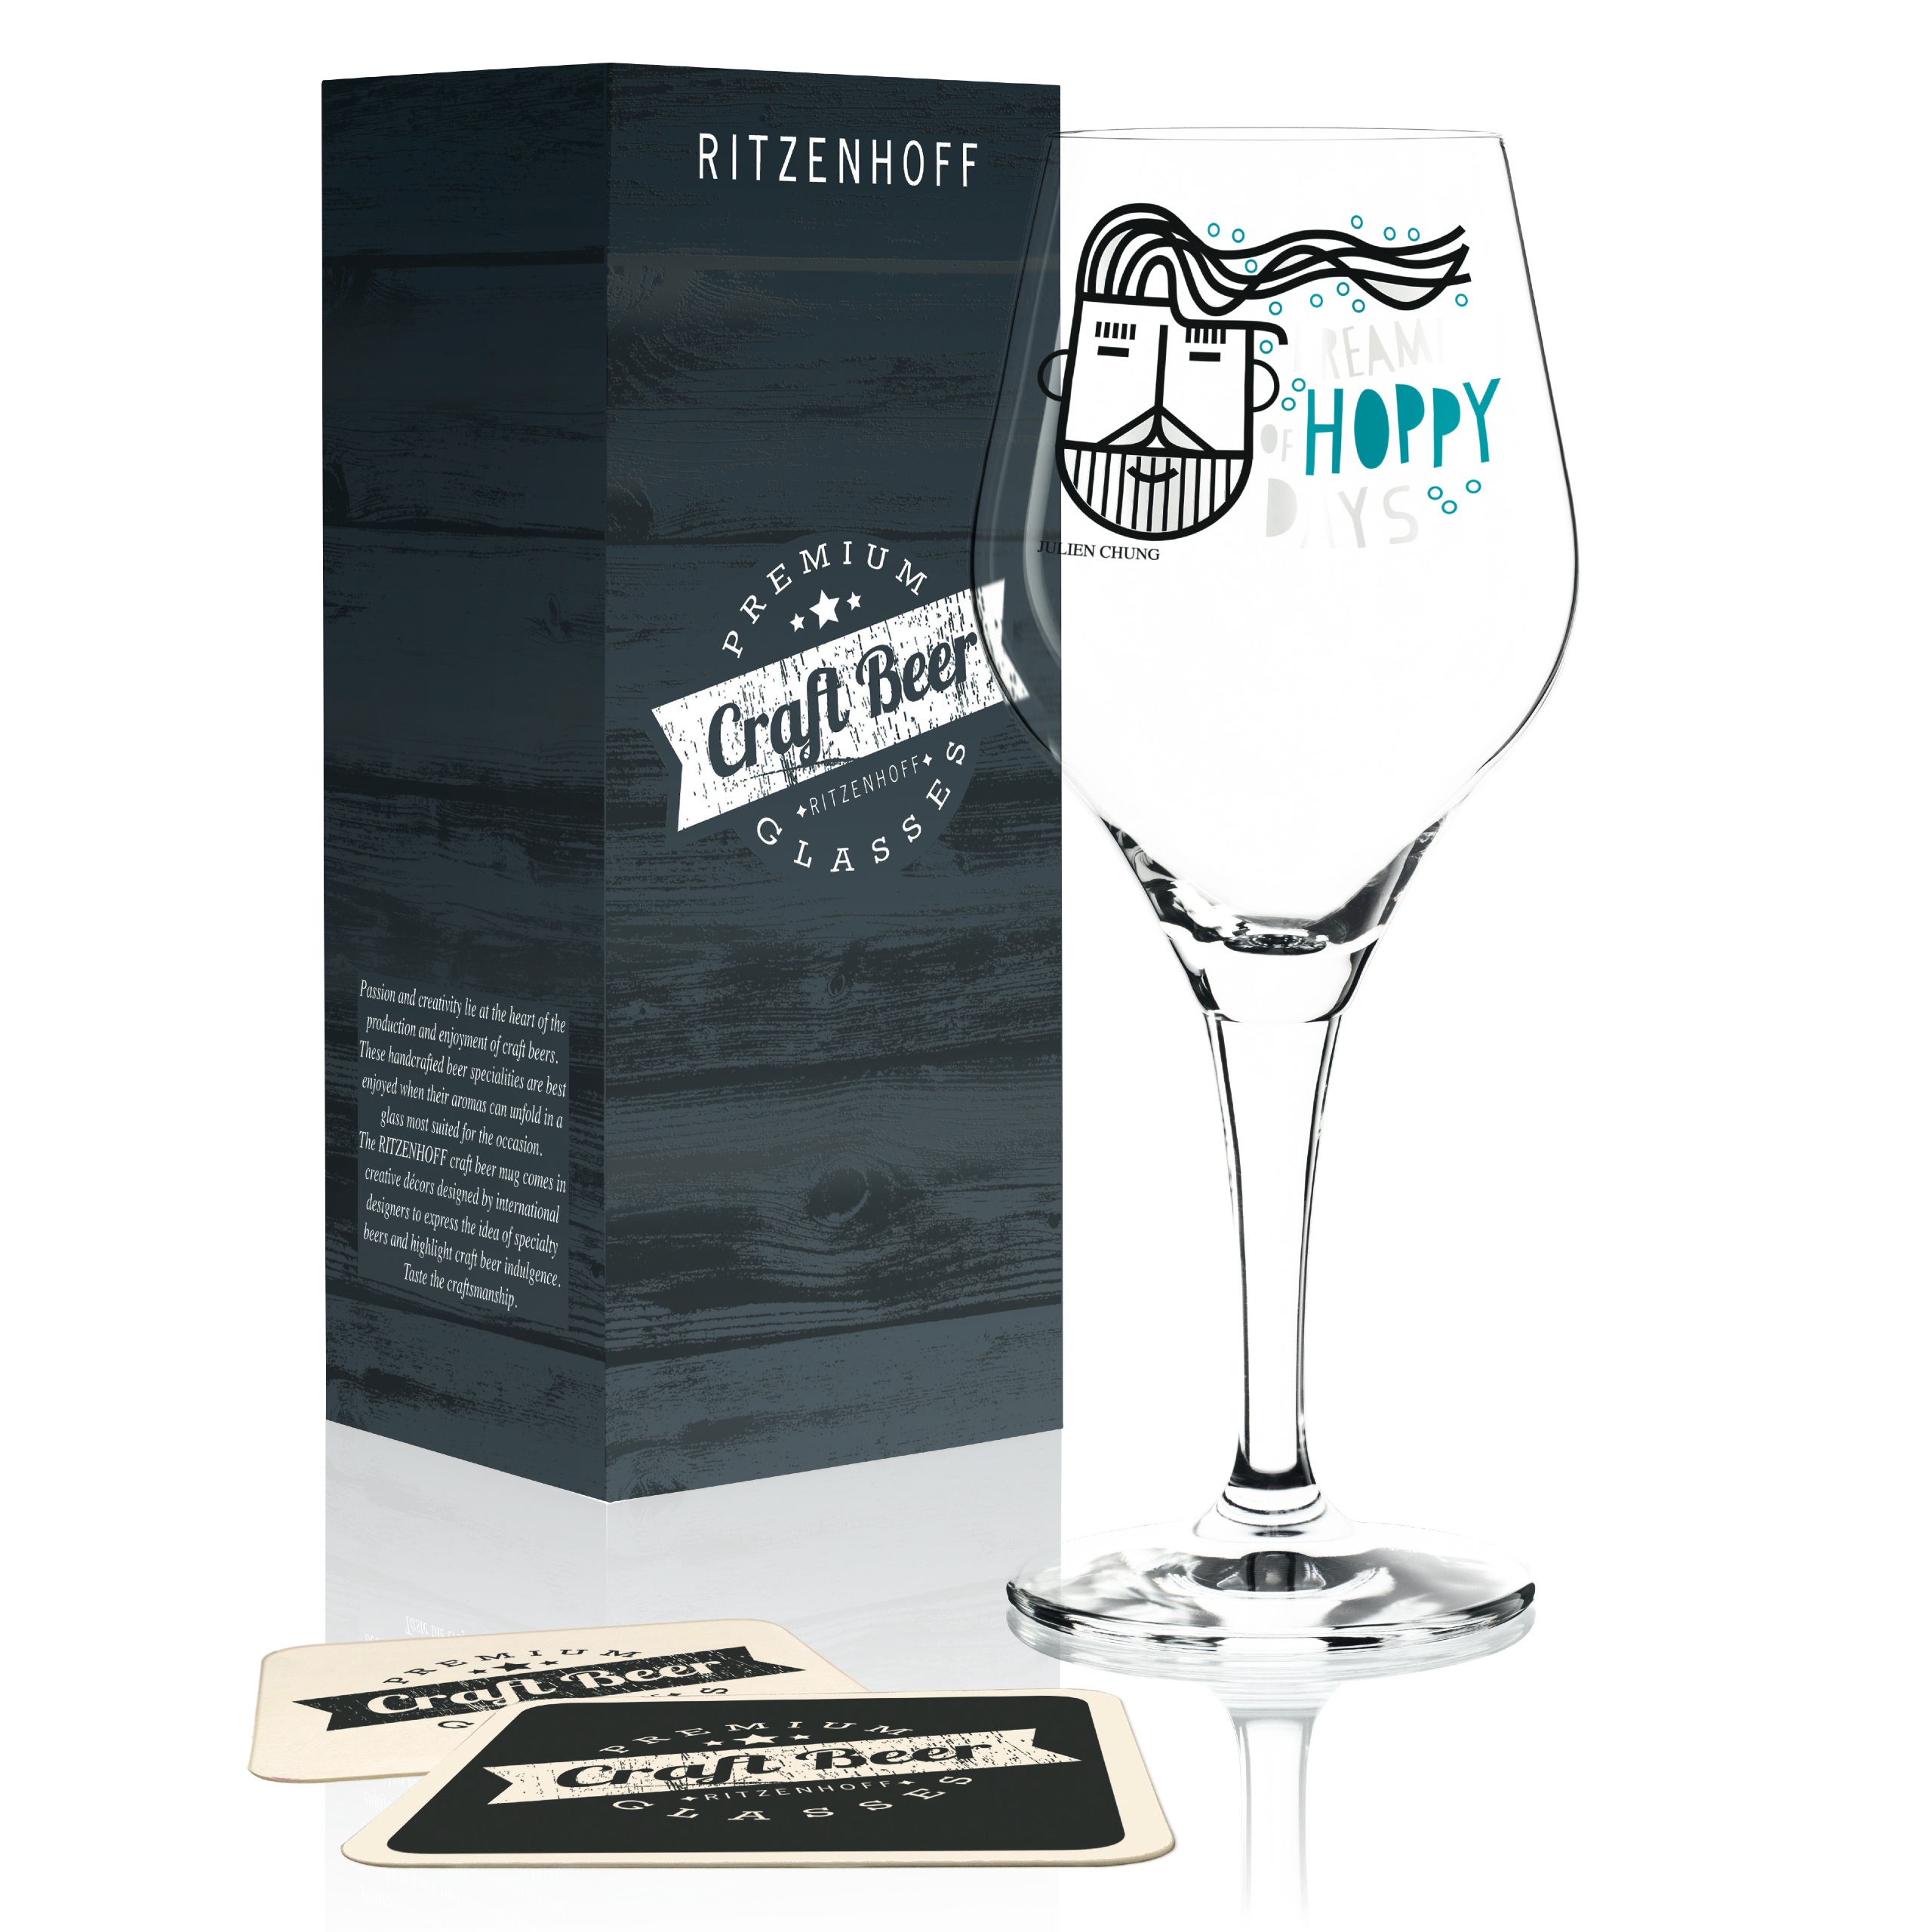 Ritzenhoff Craft Beer beer Craft Direct – by glass Box J. 2018 Chung